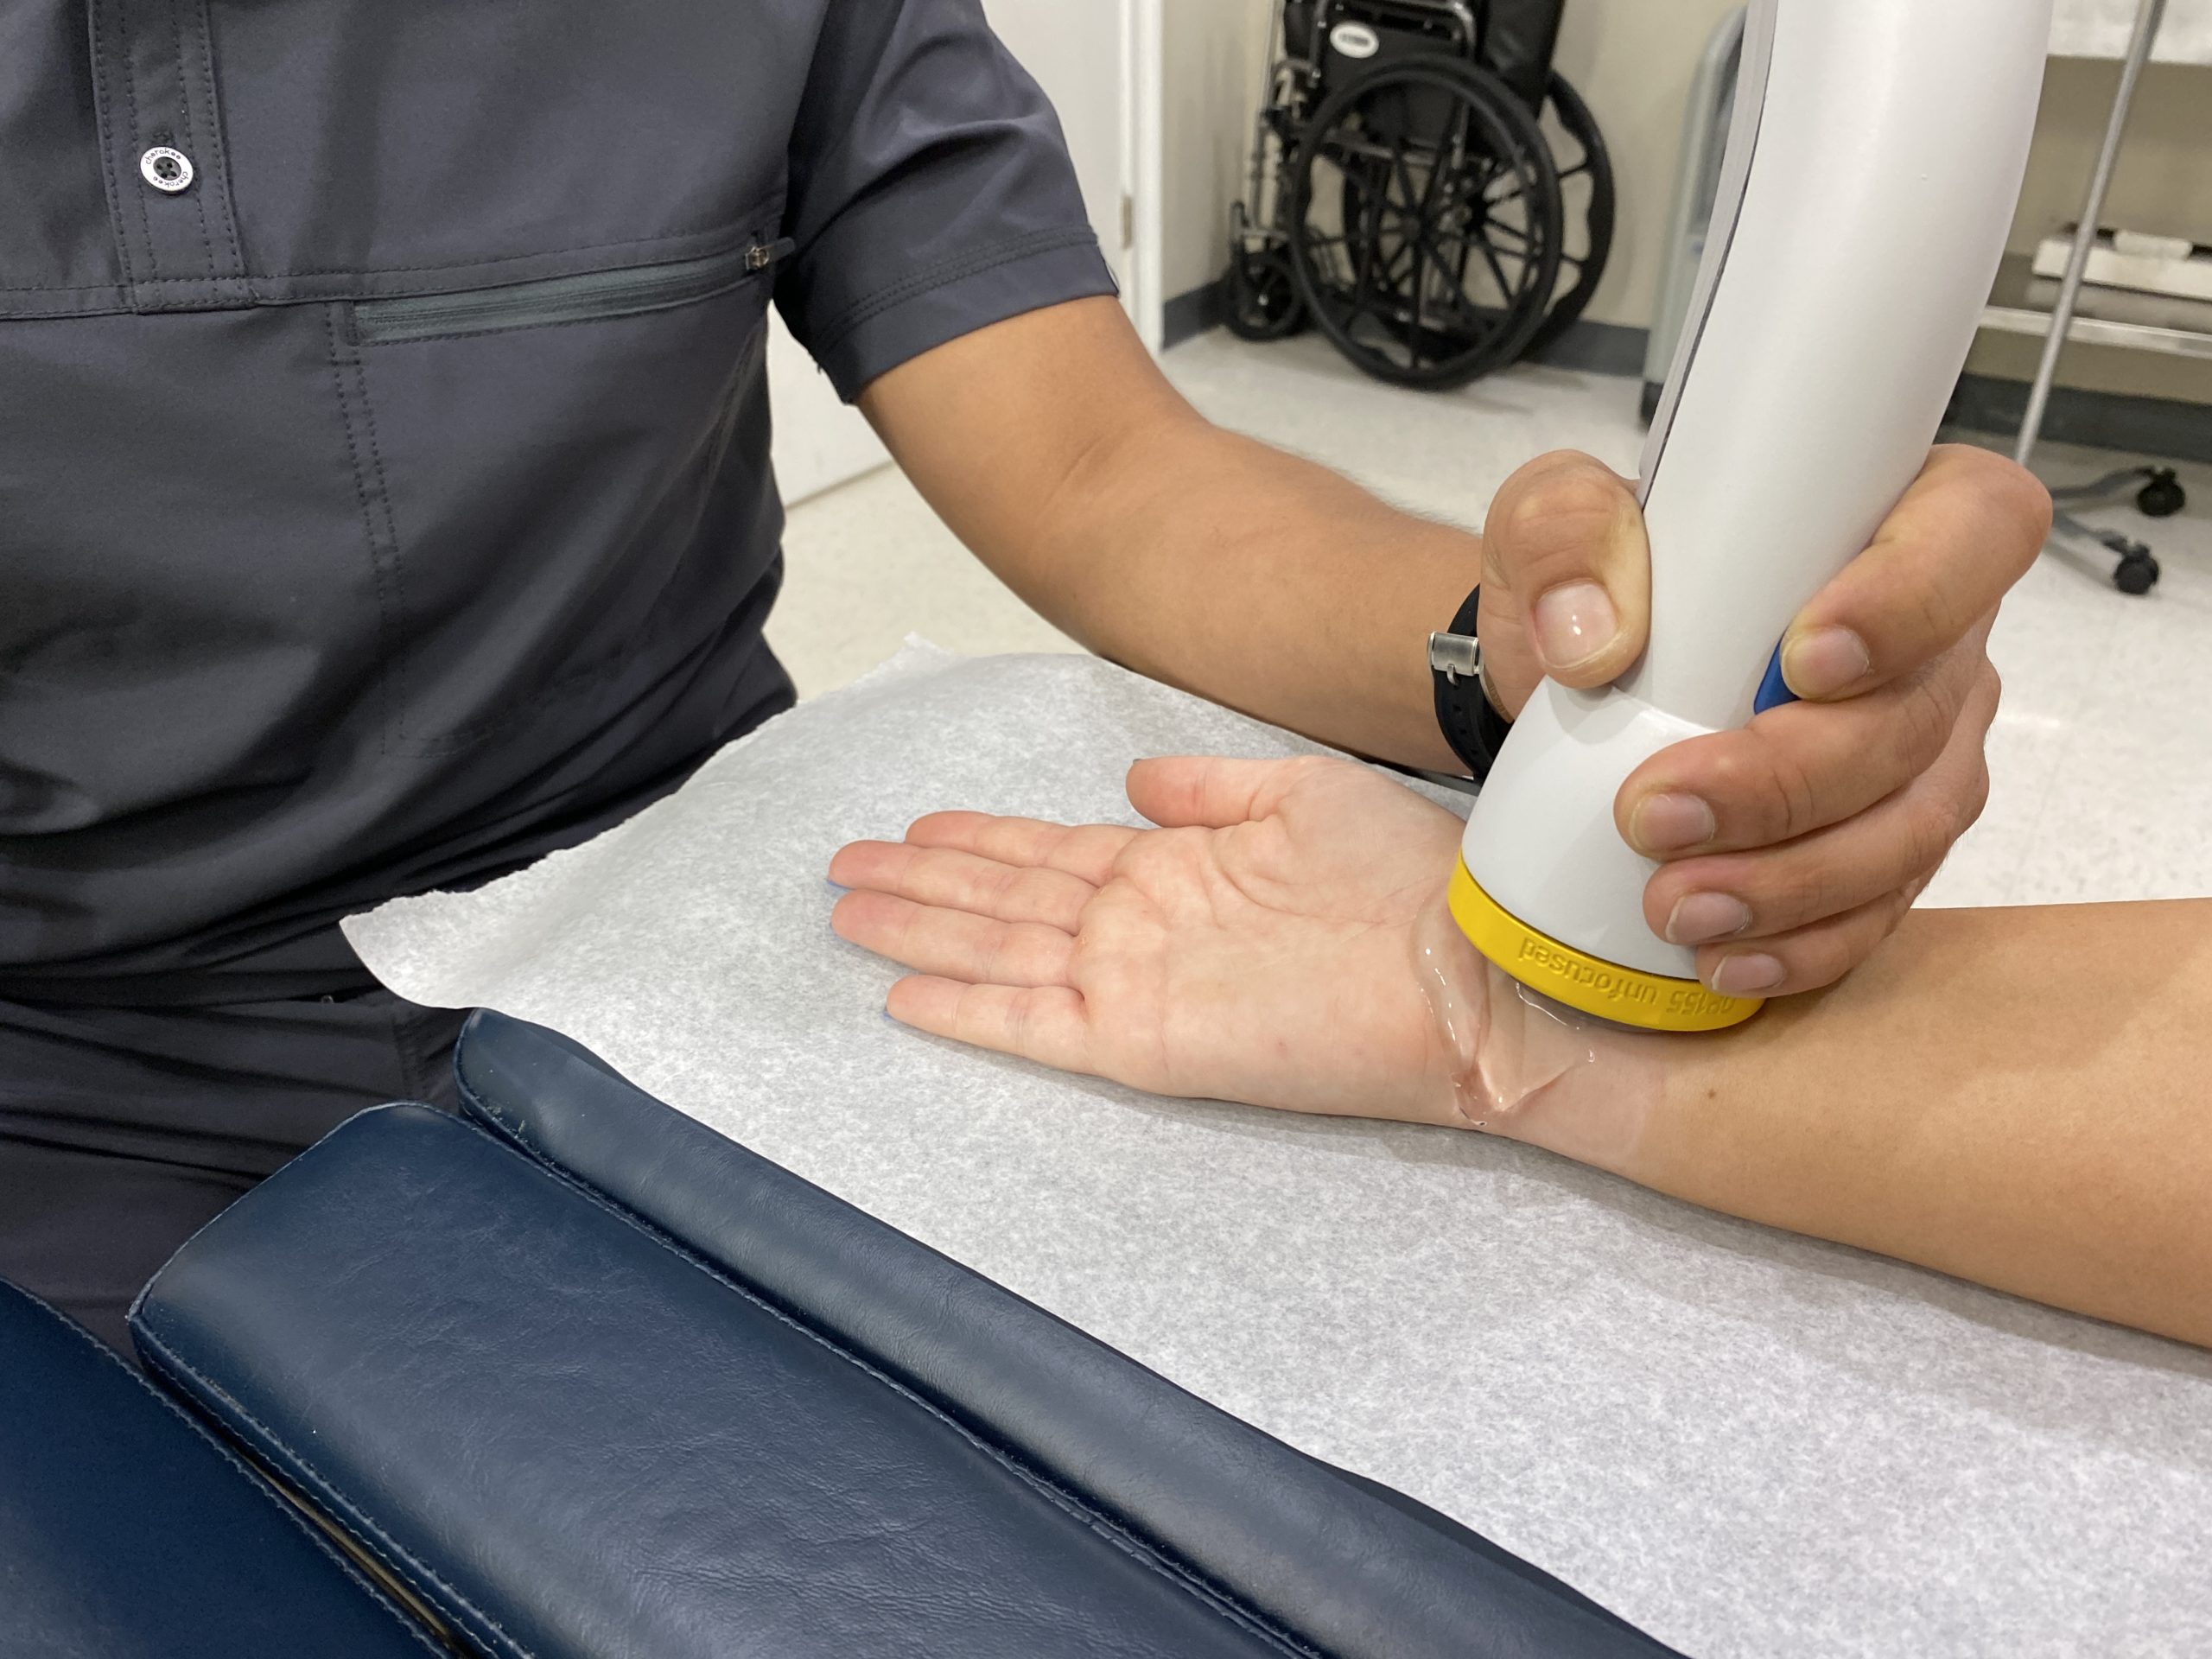 Doctor using Softwave therapy on a patient